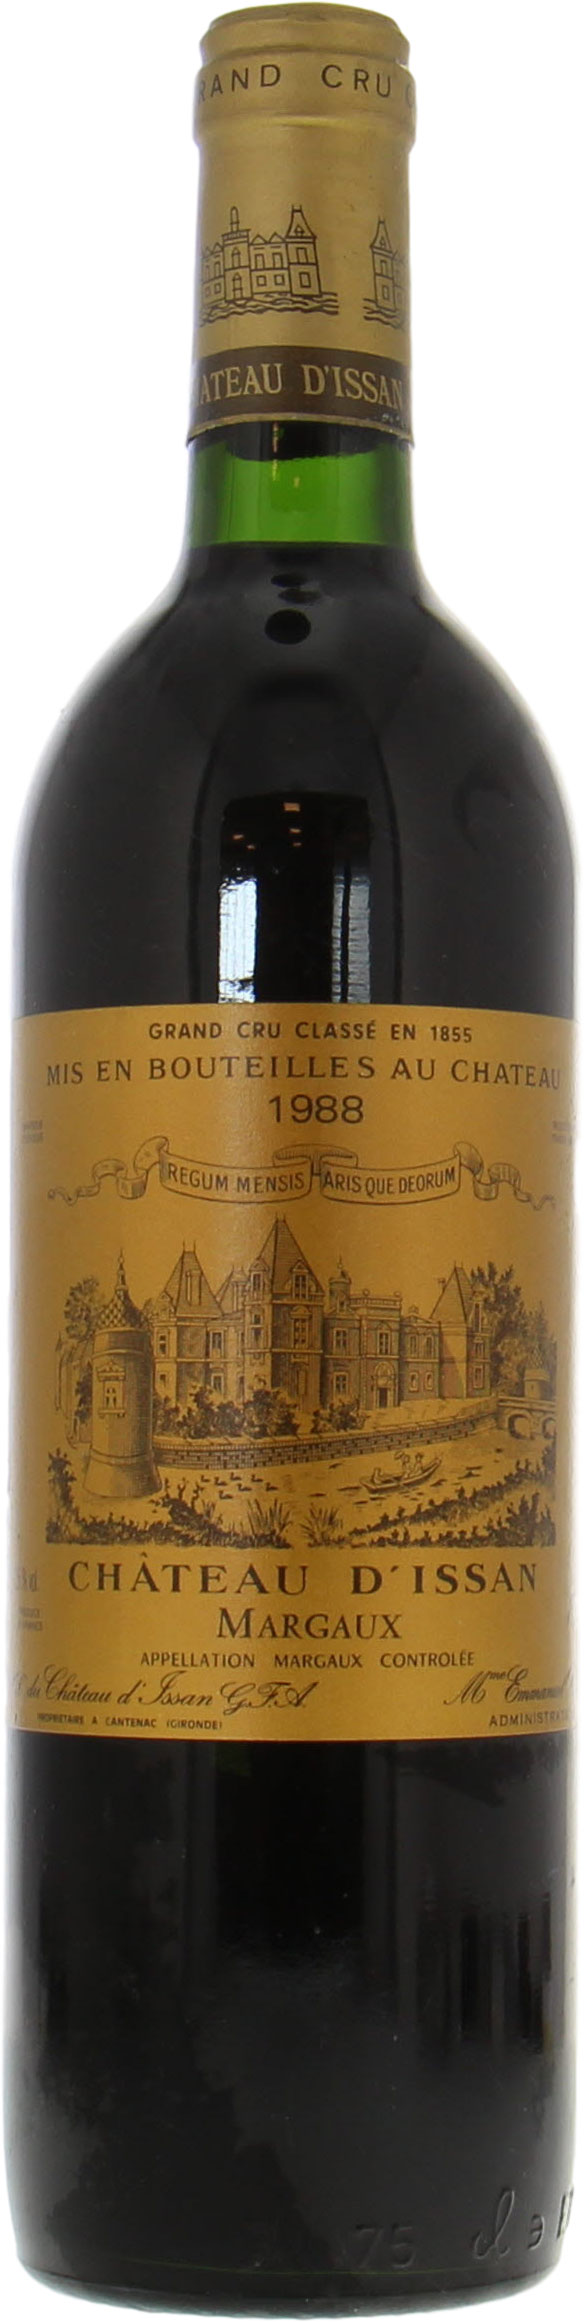 Chateau D'Issan - Chateau D'Issan 1988 Perfect